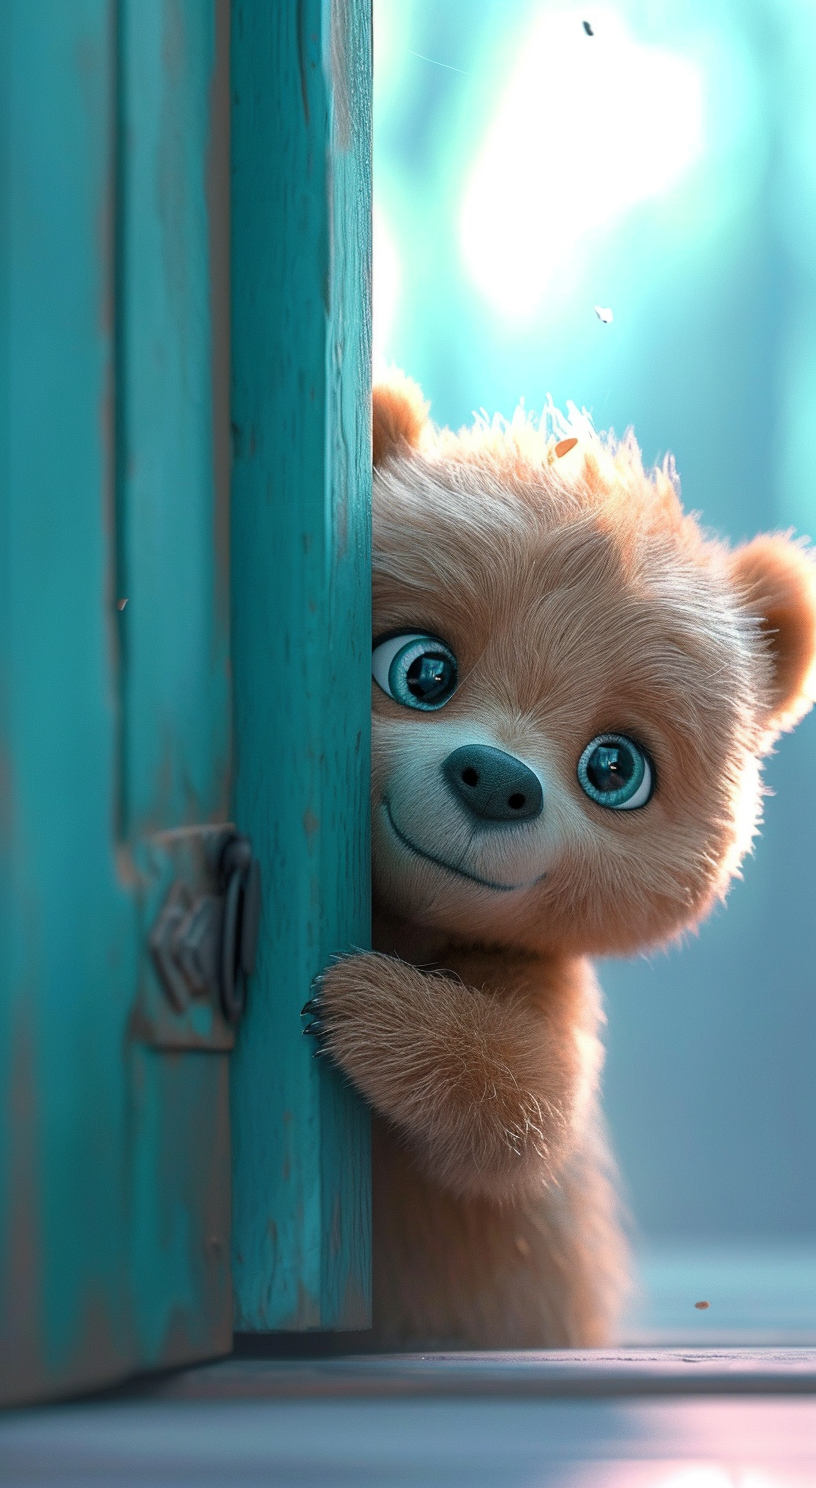 Experience the charm of our playful animated bear peeking from a turquoise door.